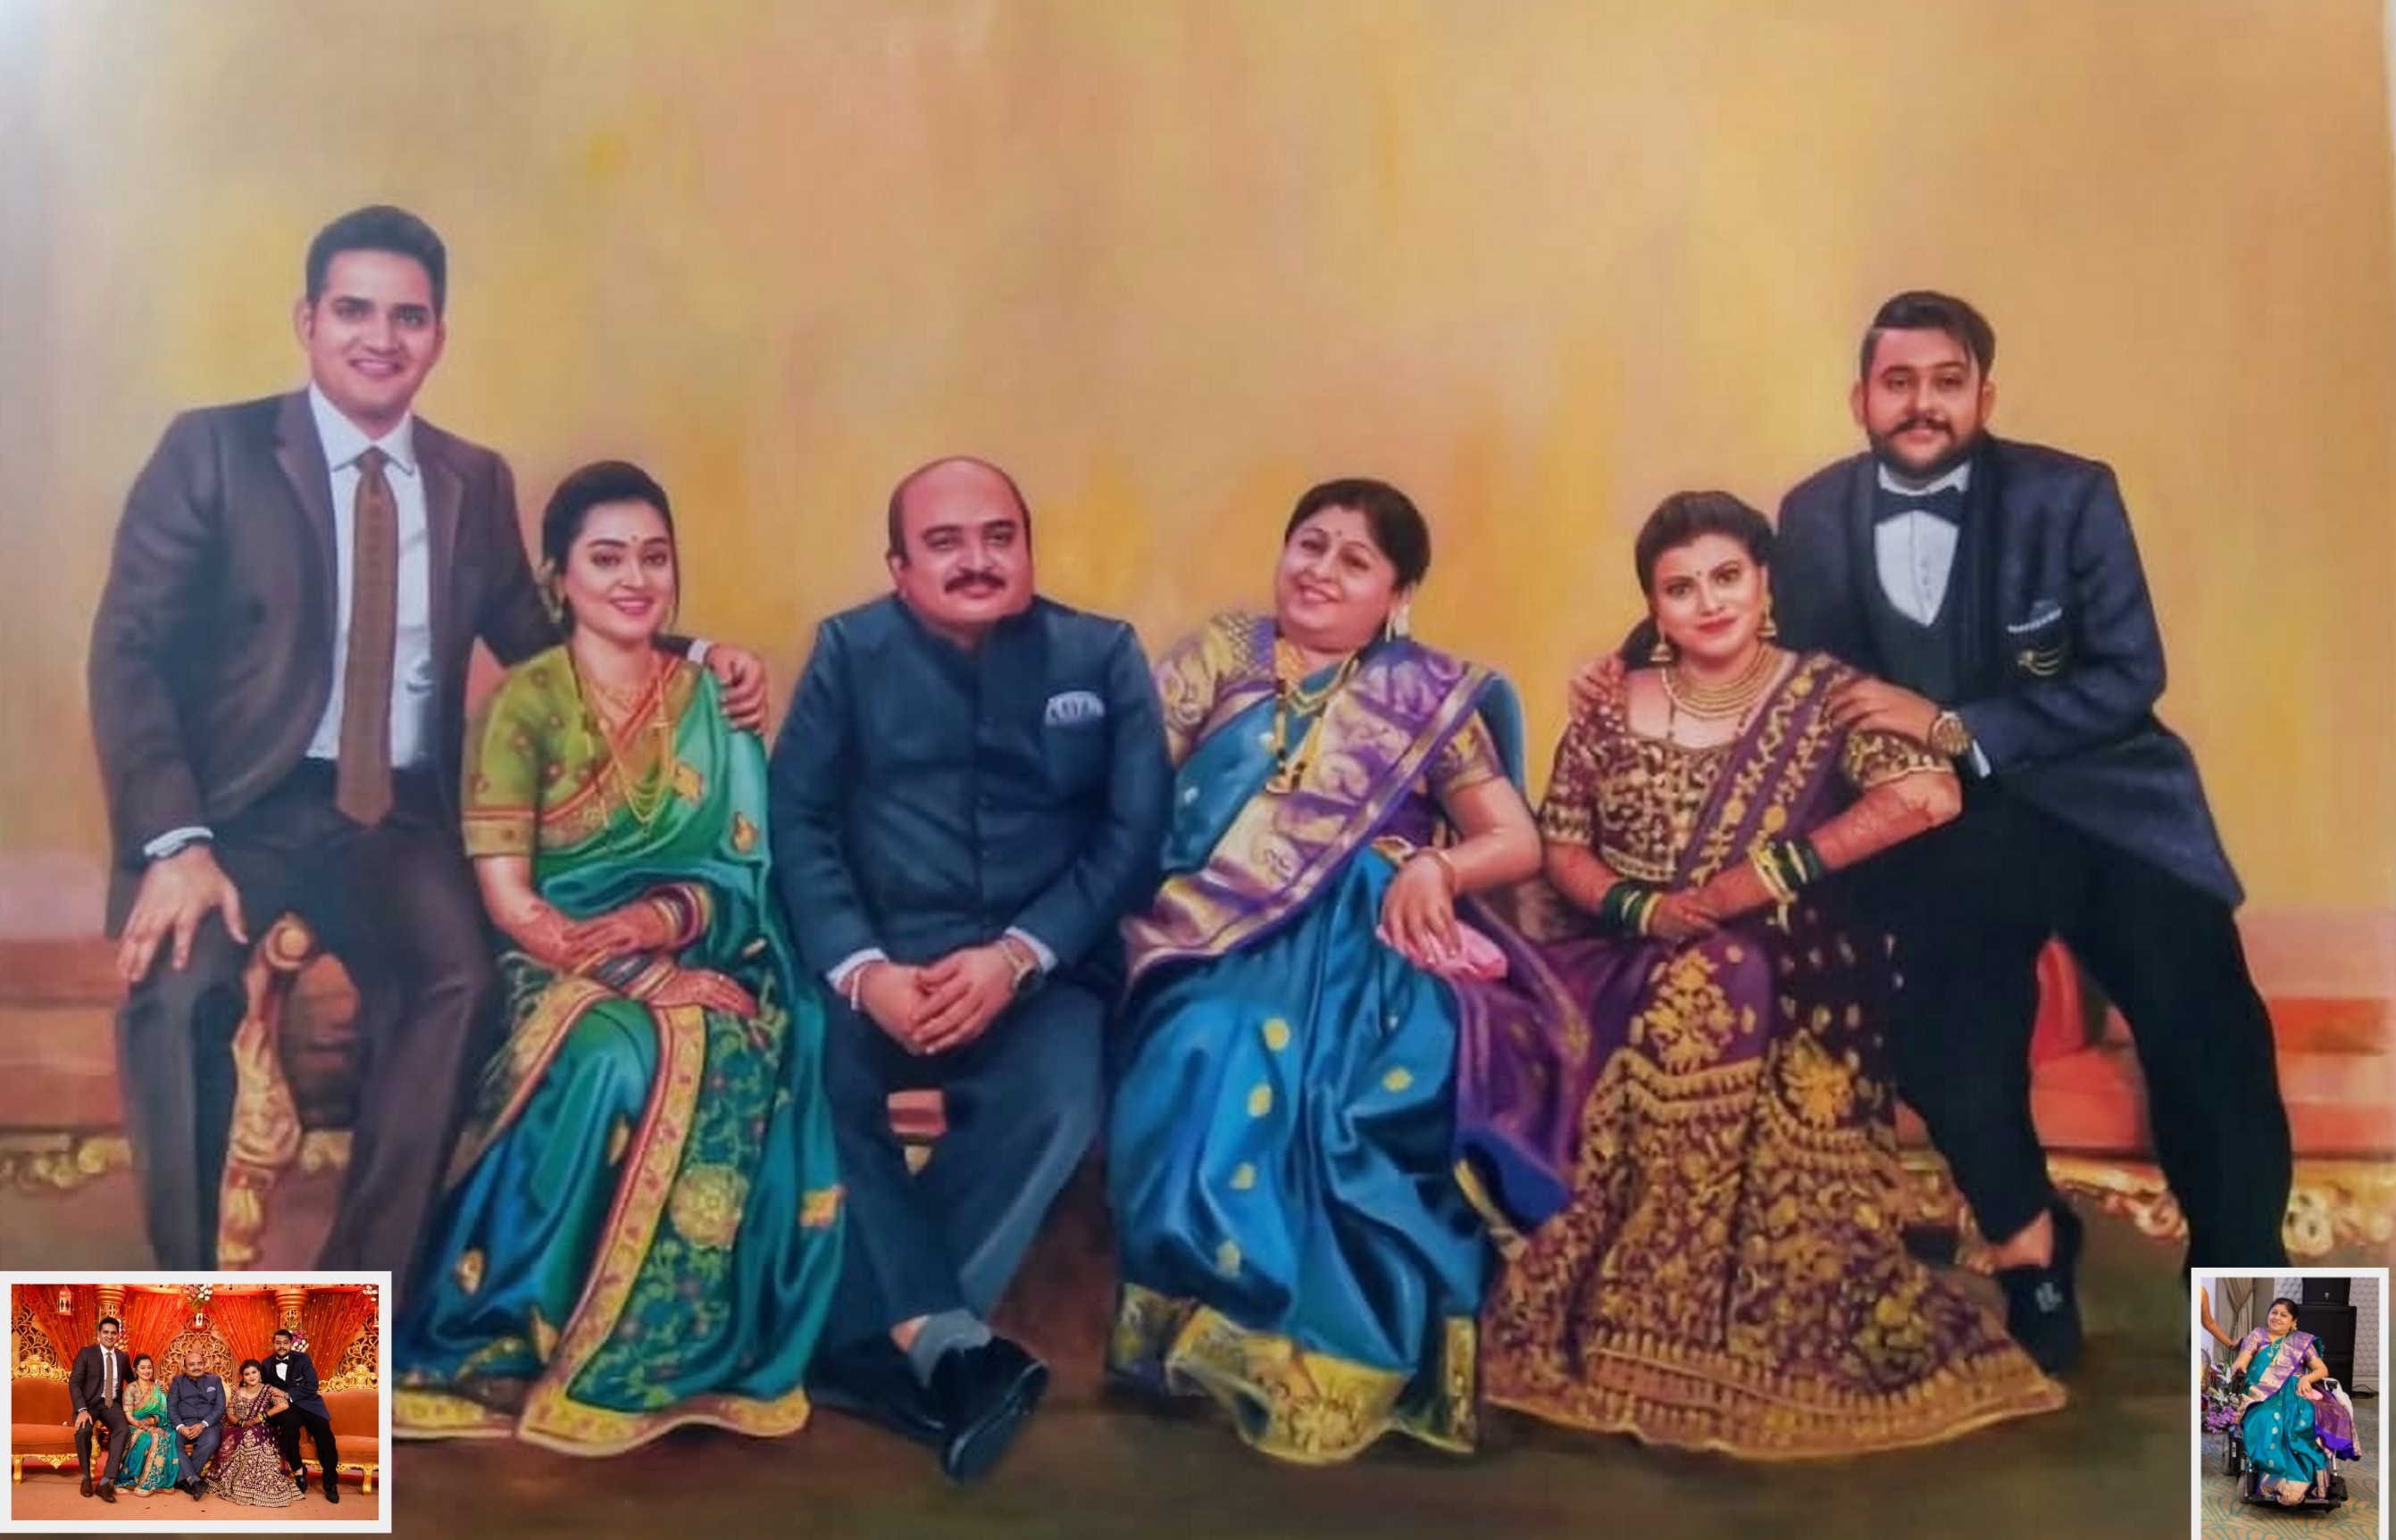 Family painting created from separate photos, merging photos, composite painting